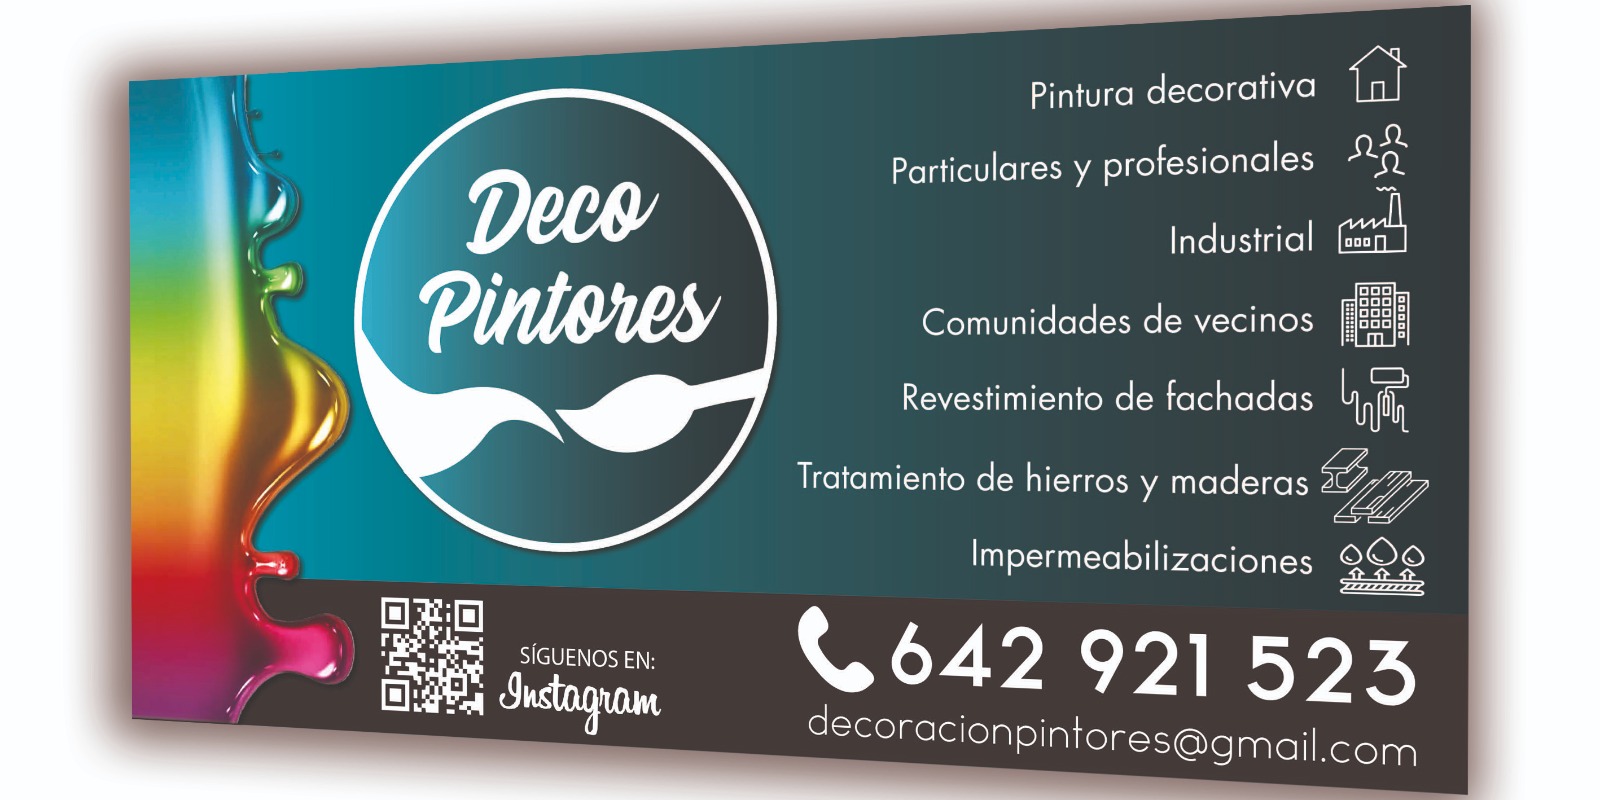 Images Deco Pintores